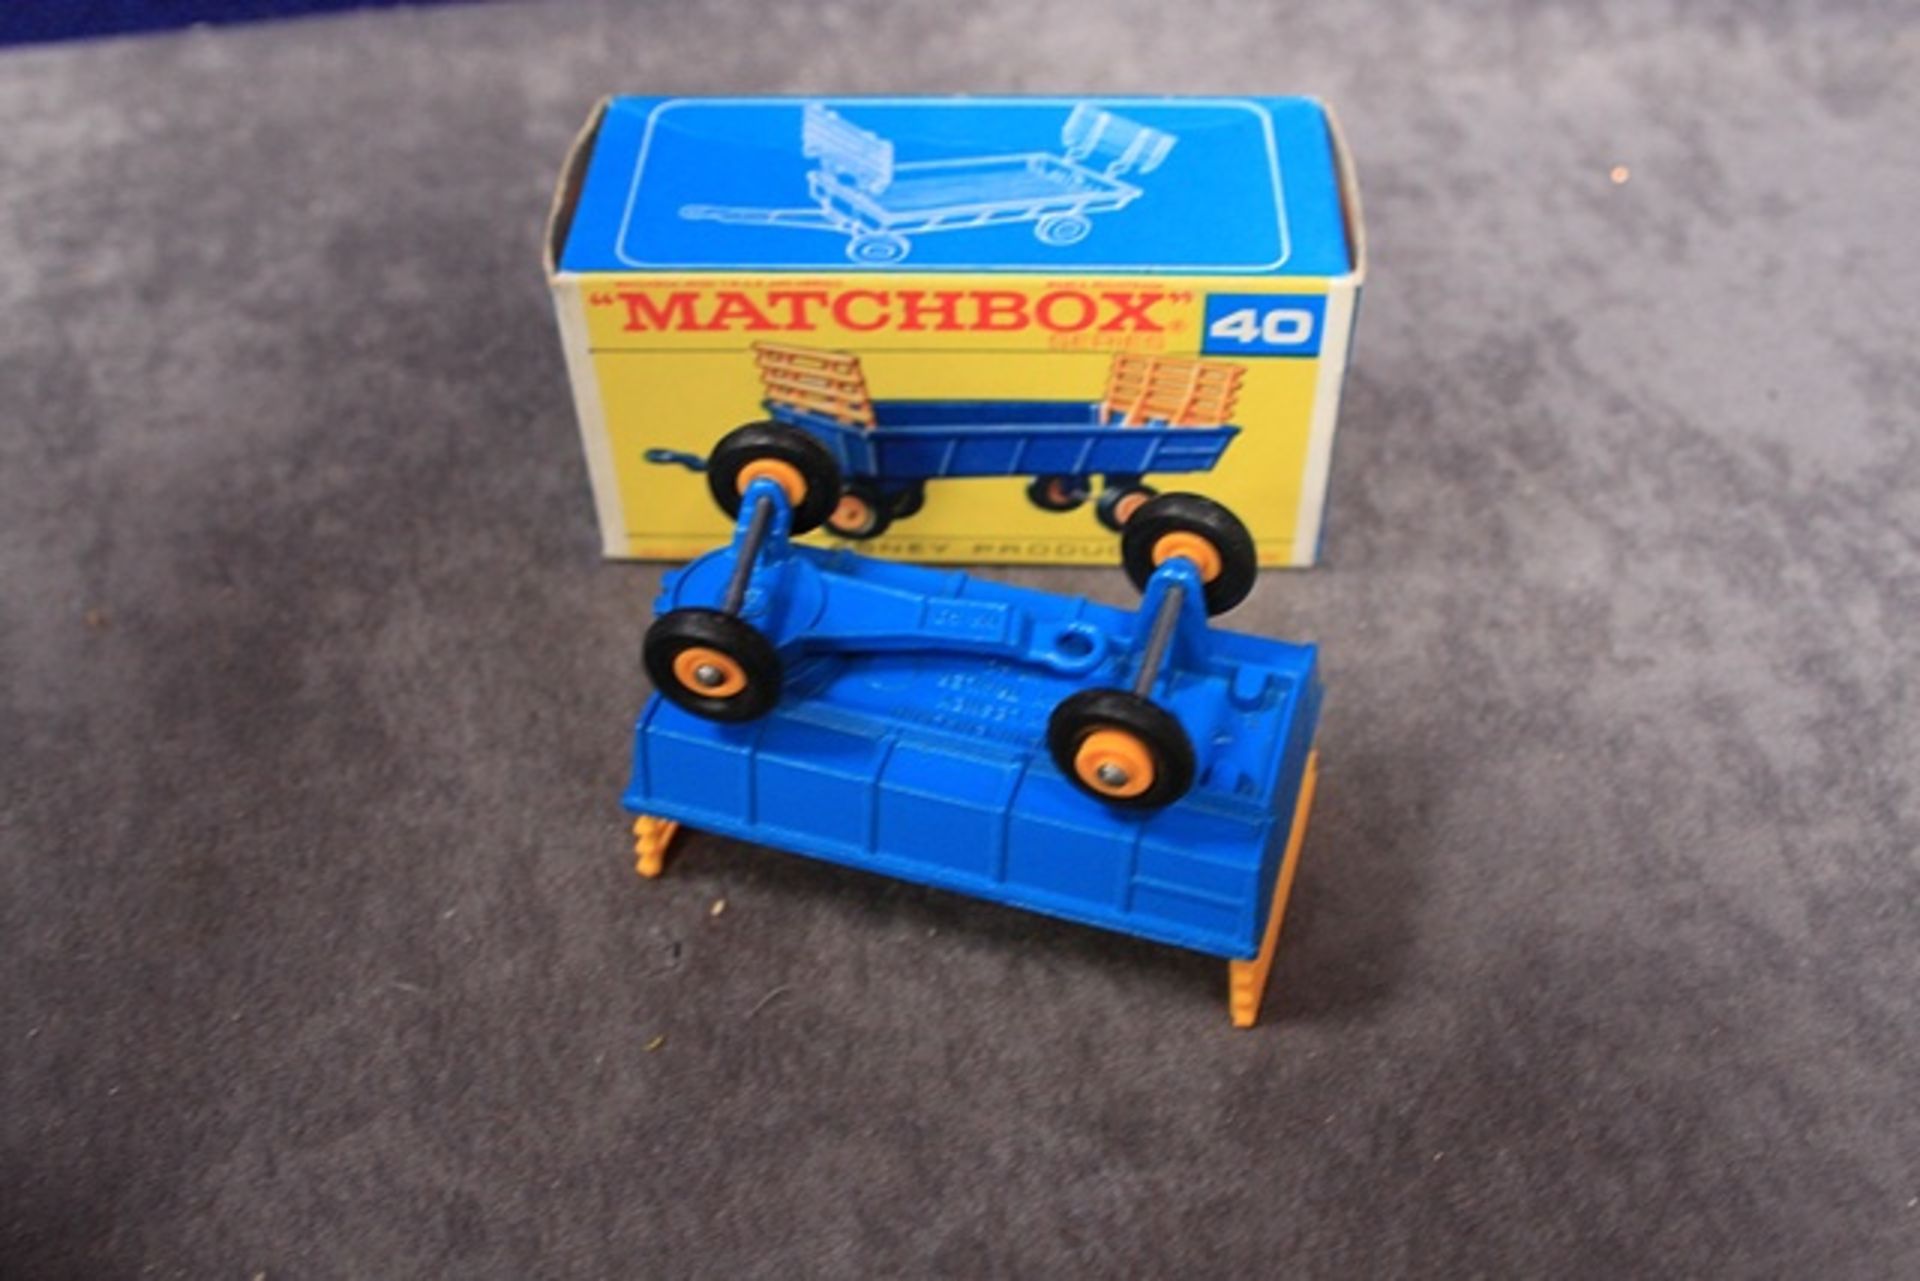 Mint Matchbox A Lesney Product #40 hay trailer in crisp Box - Image 3 of 3